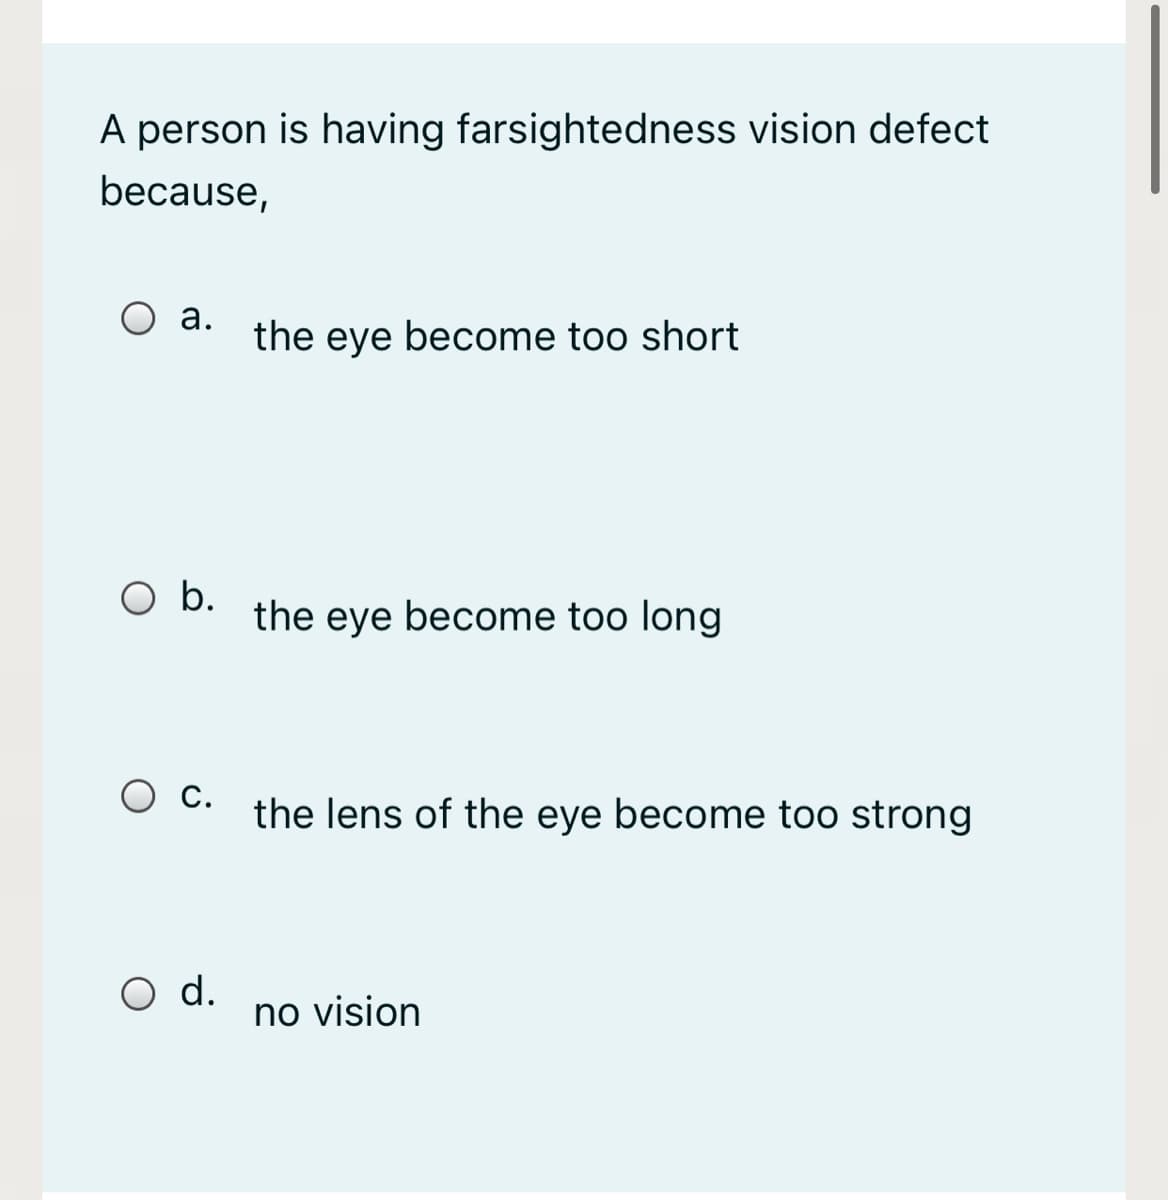 A person is having farsightedness vision defect
because,
а.
the eye become too short
Ob.
the eye become too long
С.
the lens of the eye become too strong
d.
no vision
